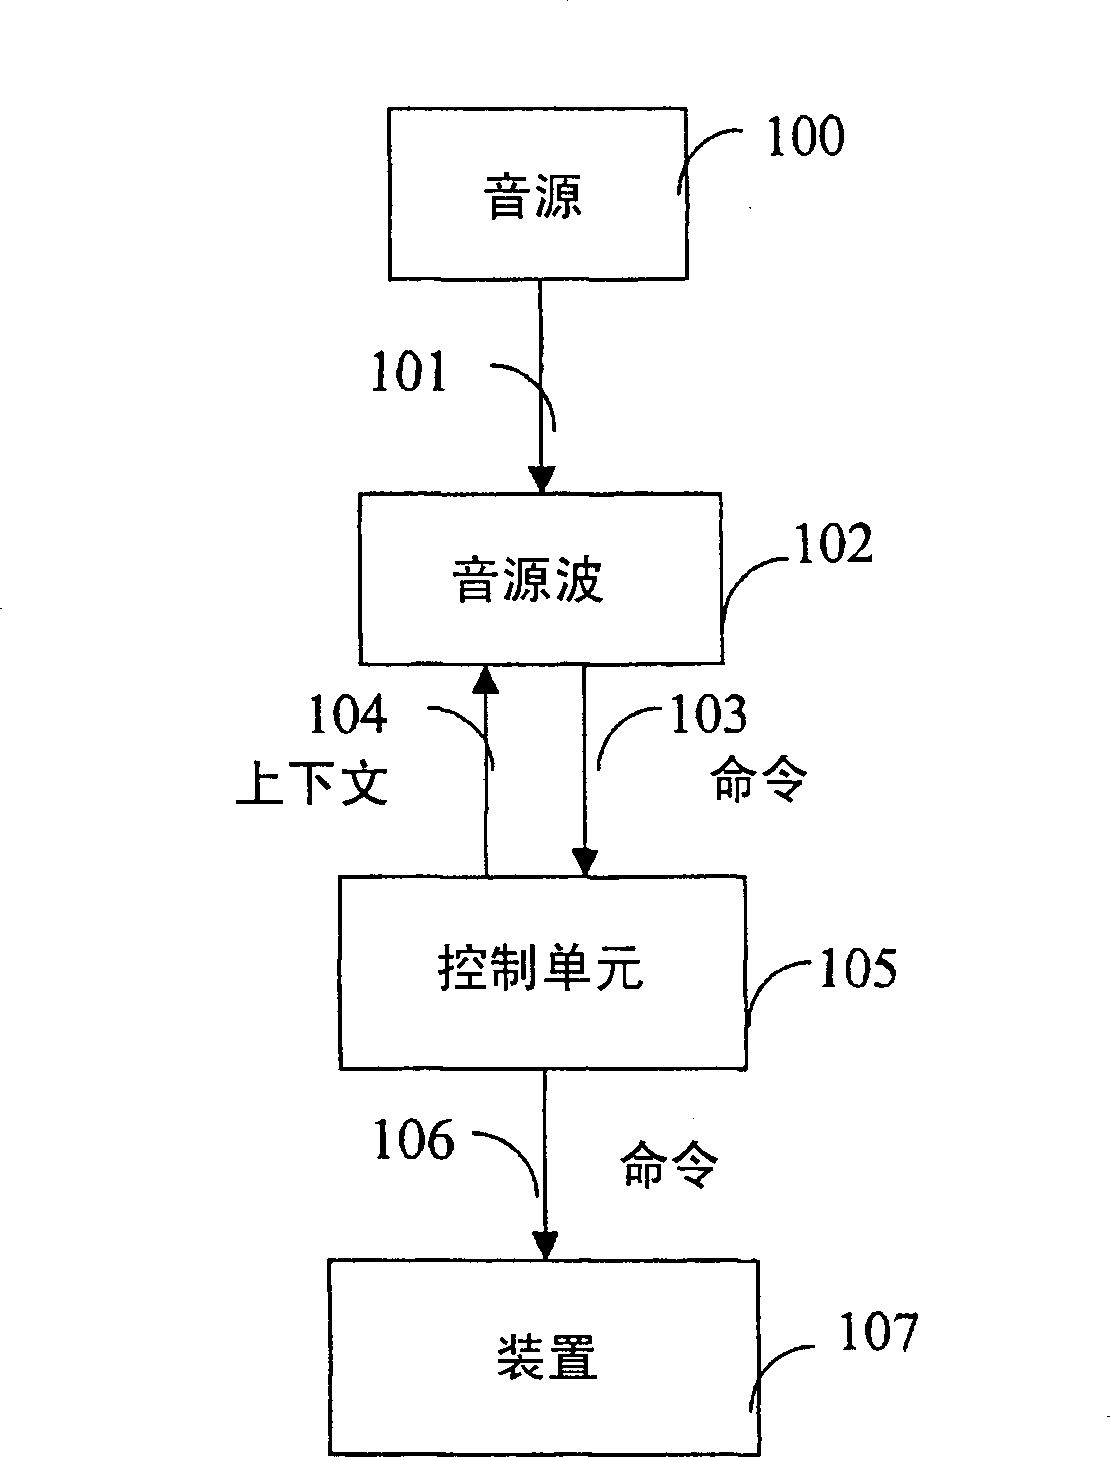 Voice recognition device and method for large-scale words